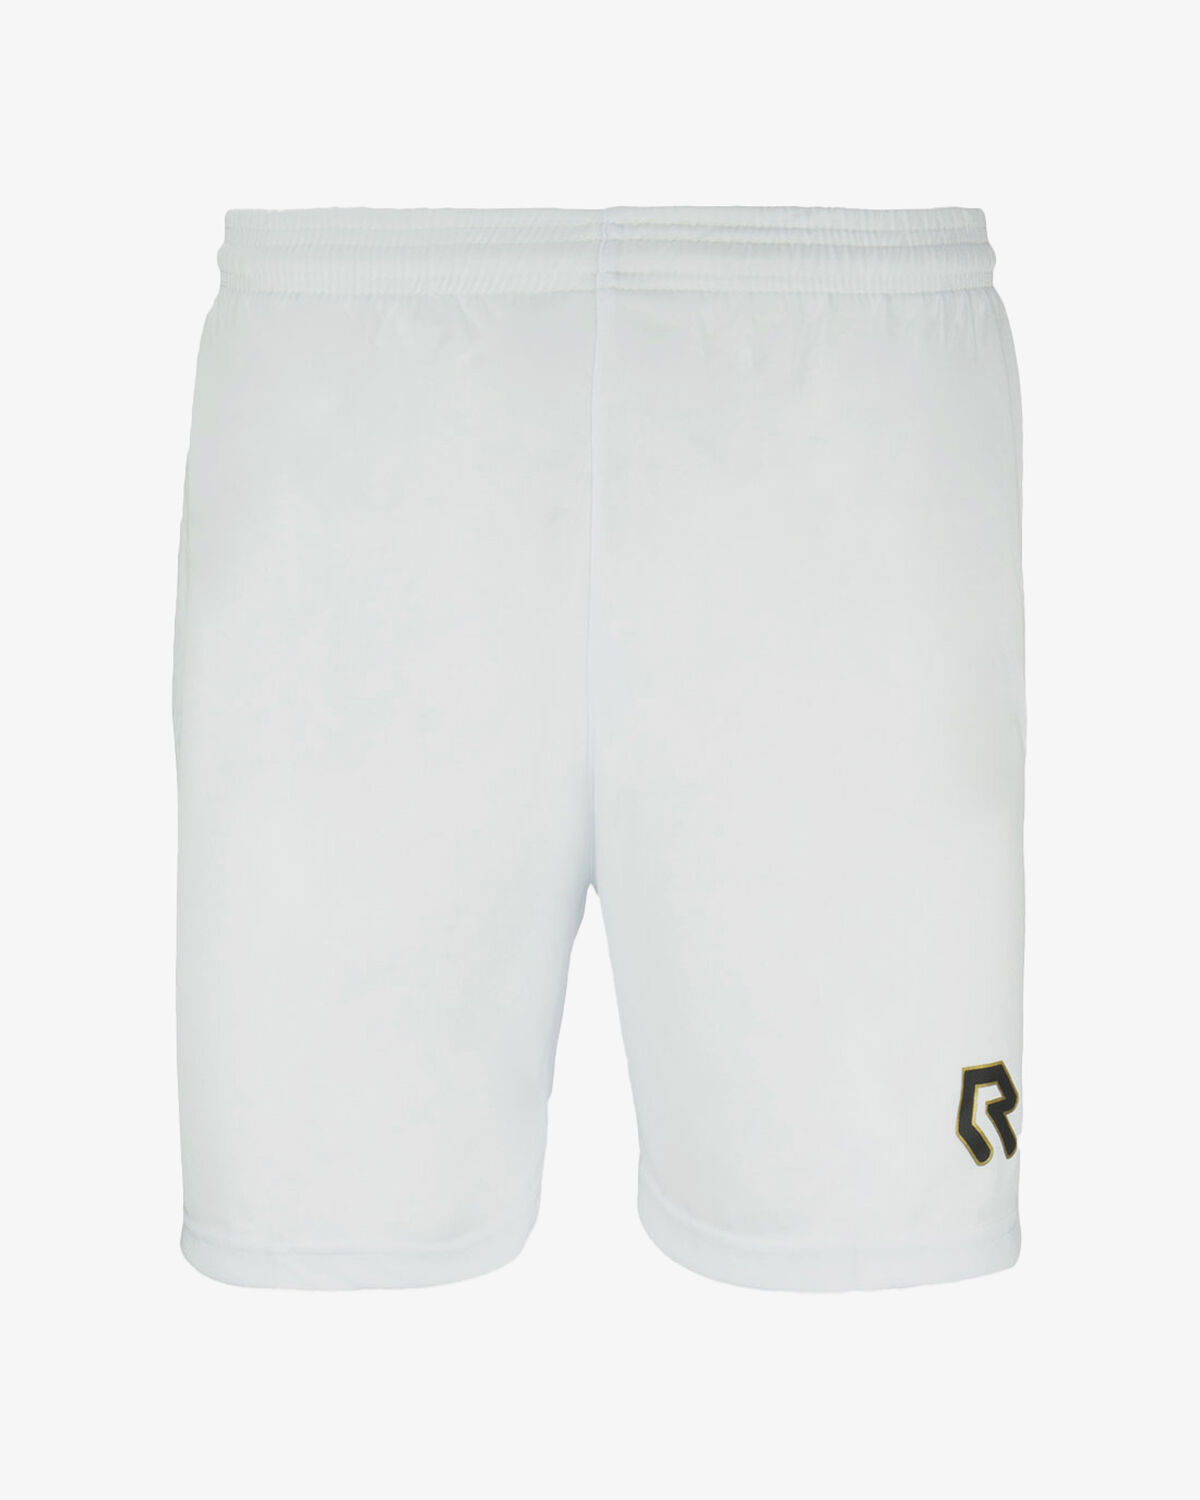 Shorts Competitor, White, hi-res